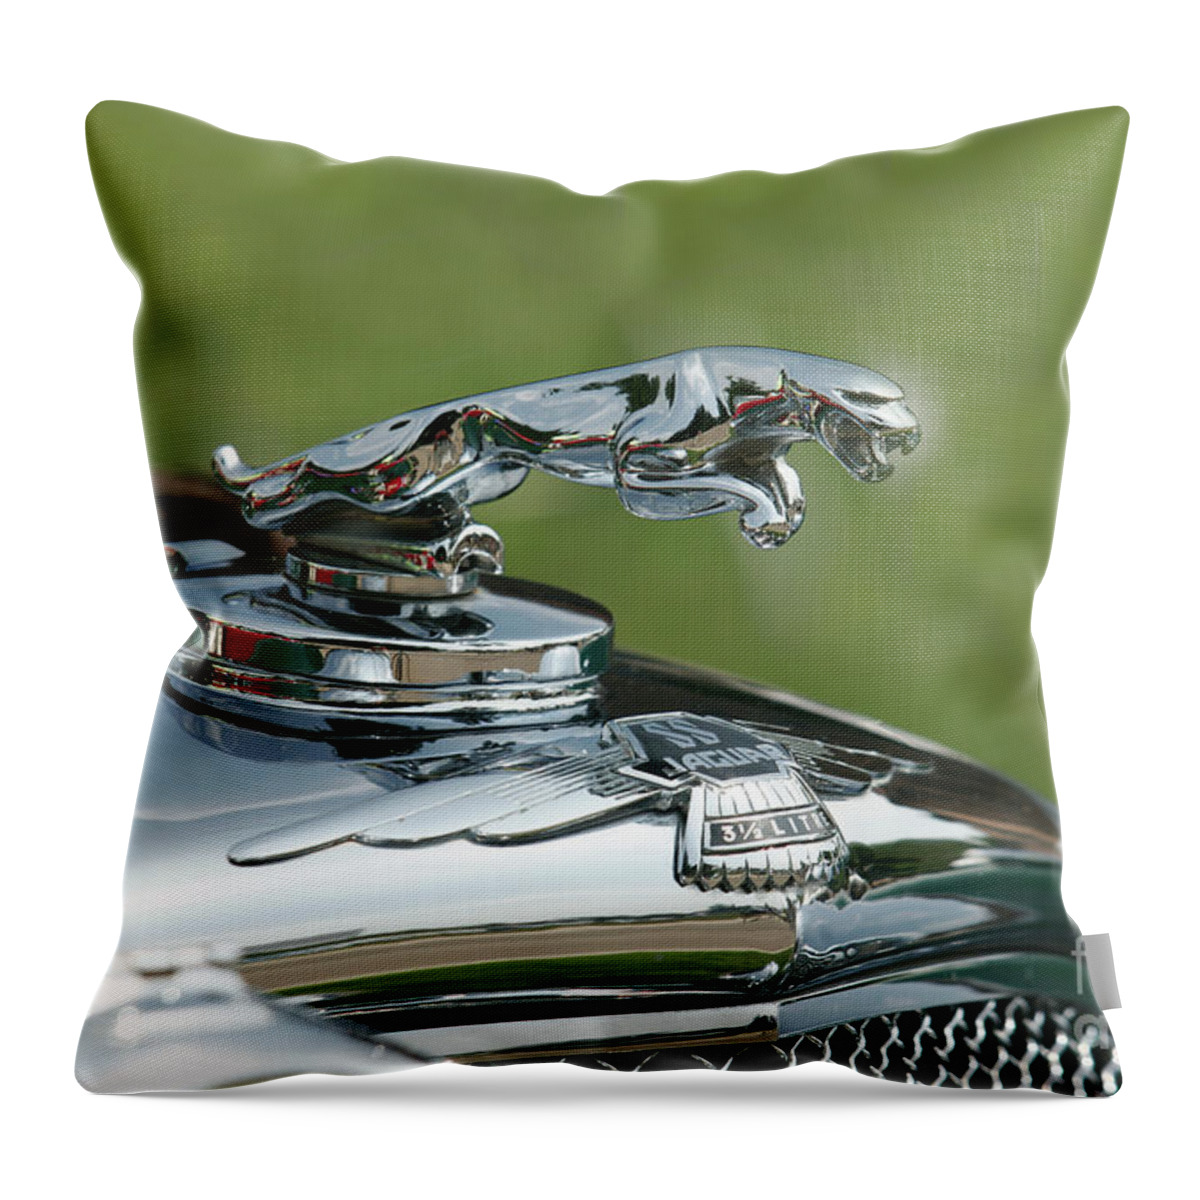 Vintage Throw Pillow featuring the photograph 1936 Jaguar Ss Flying Car Hood Ornament by Lucie Collins